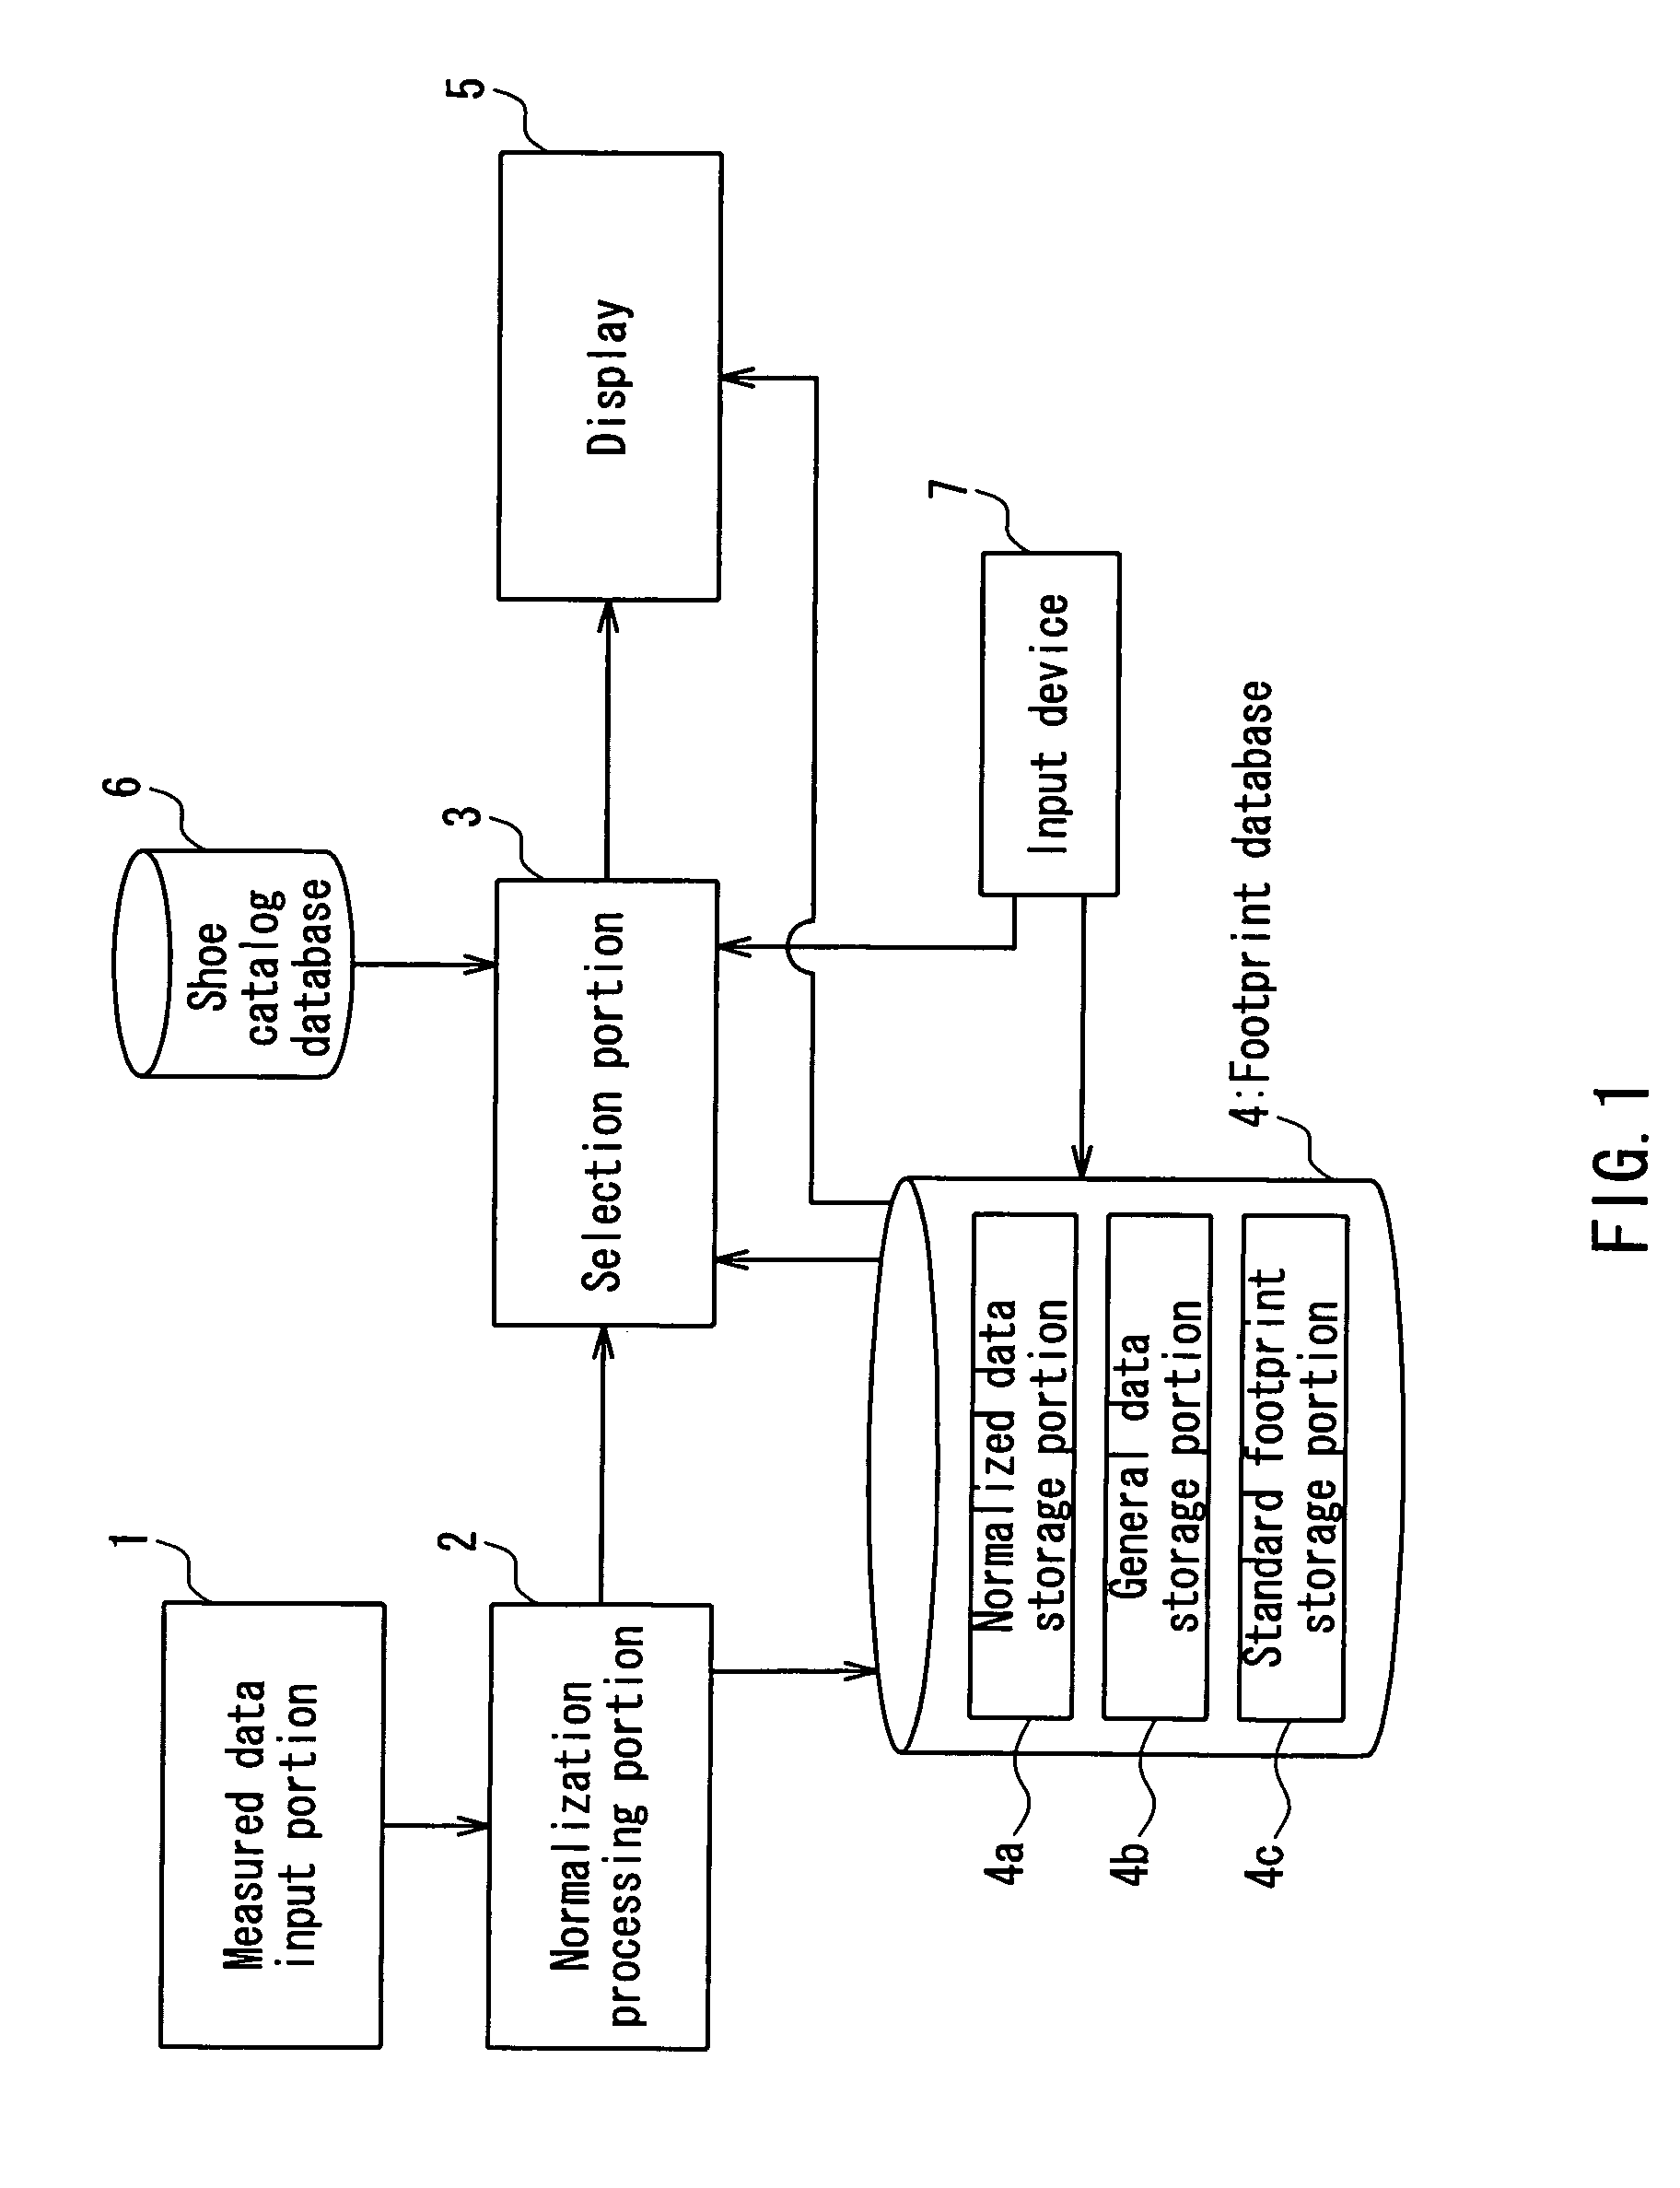 System and method for assisting shoe selection